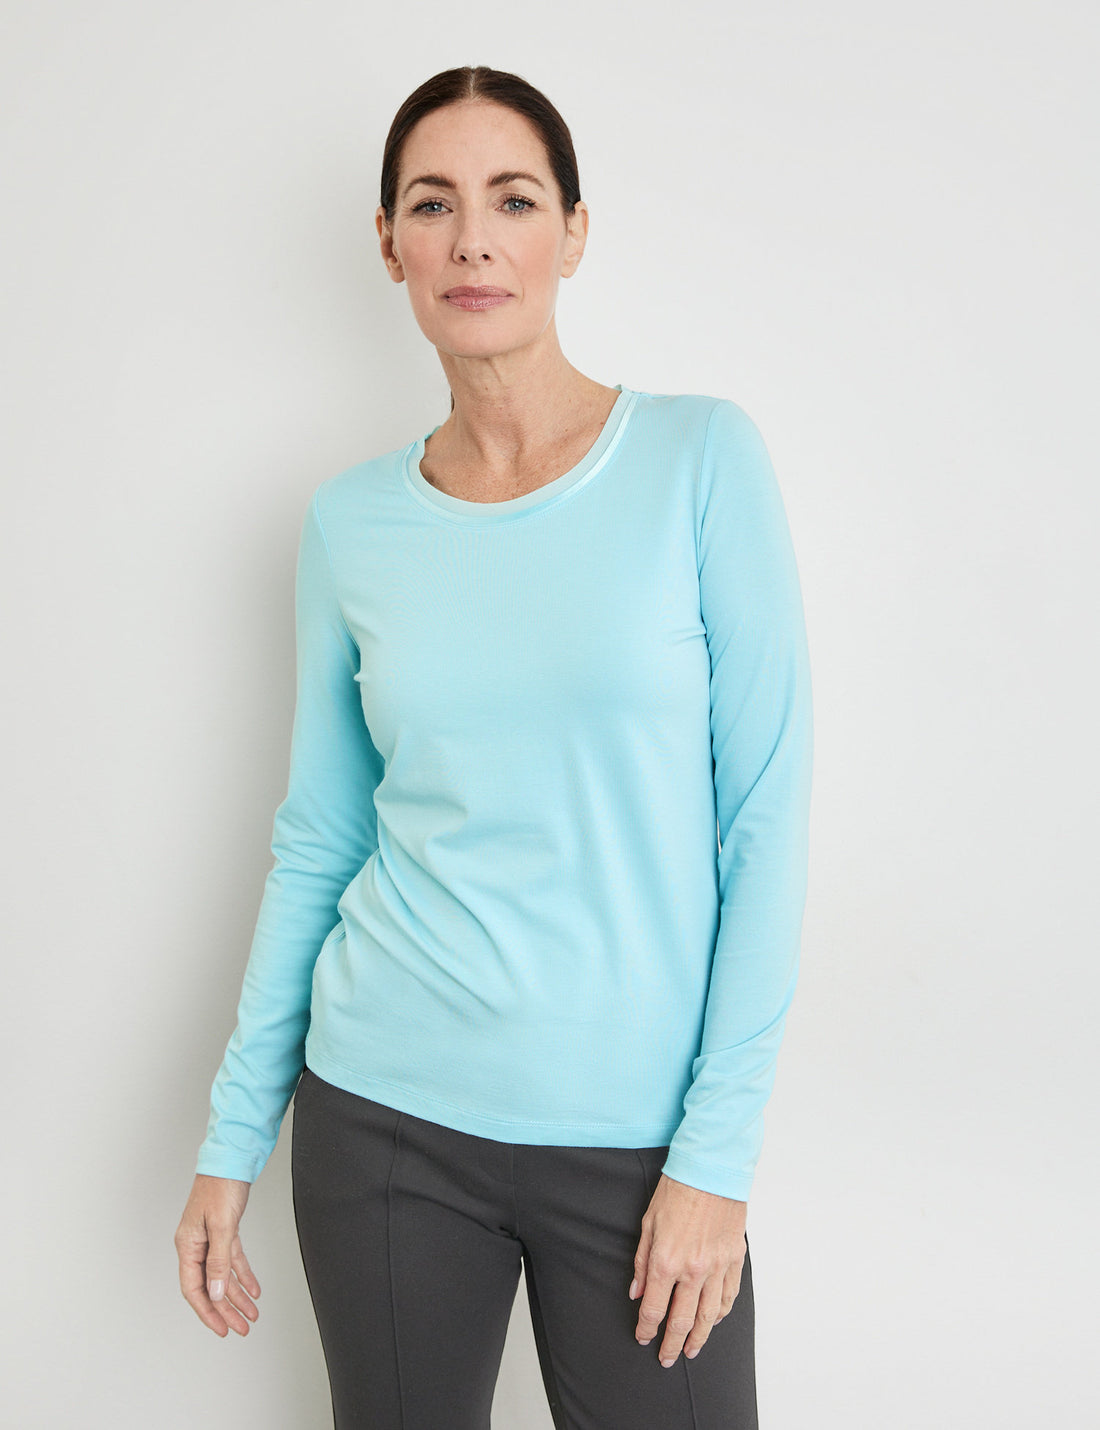 Long Sleeve Top With A Sheer Neckline Trim_370294-35060_80938_01